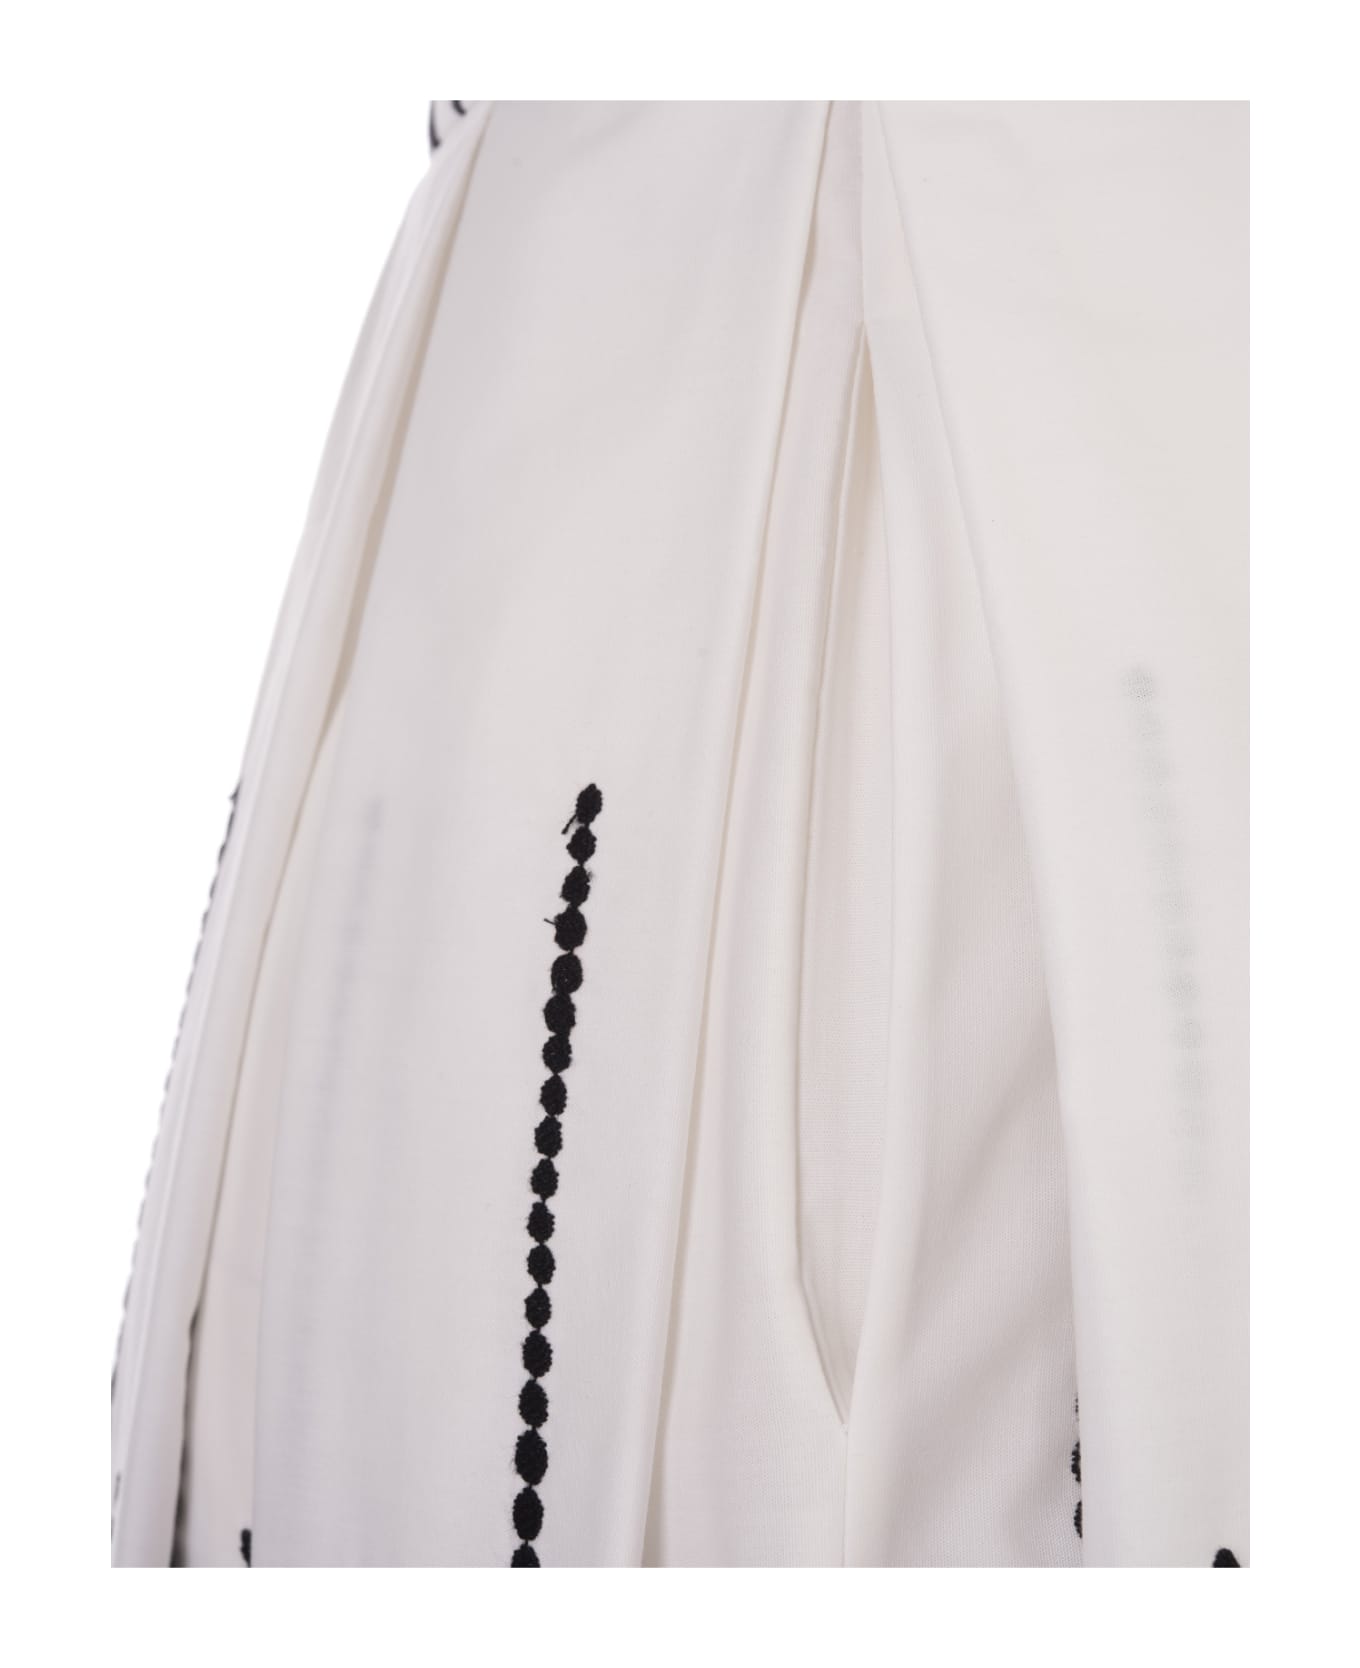 Elie Saab Moon Embroidered Poplin Dress In White And Black - White